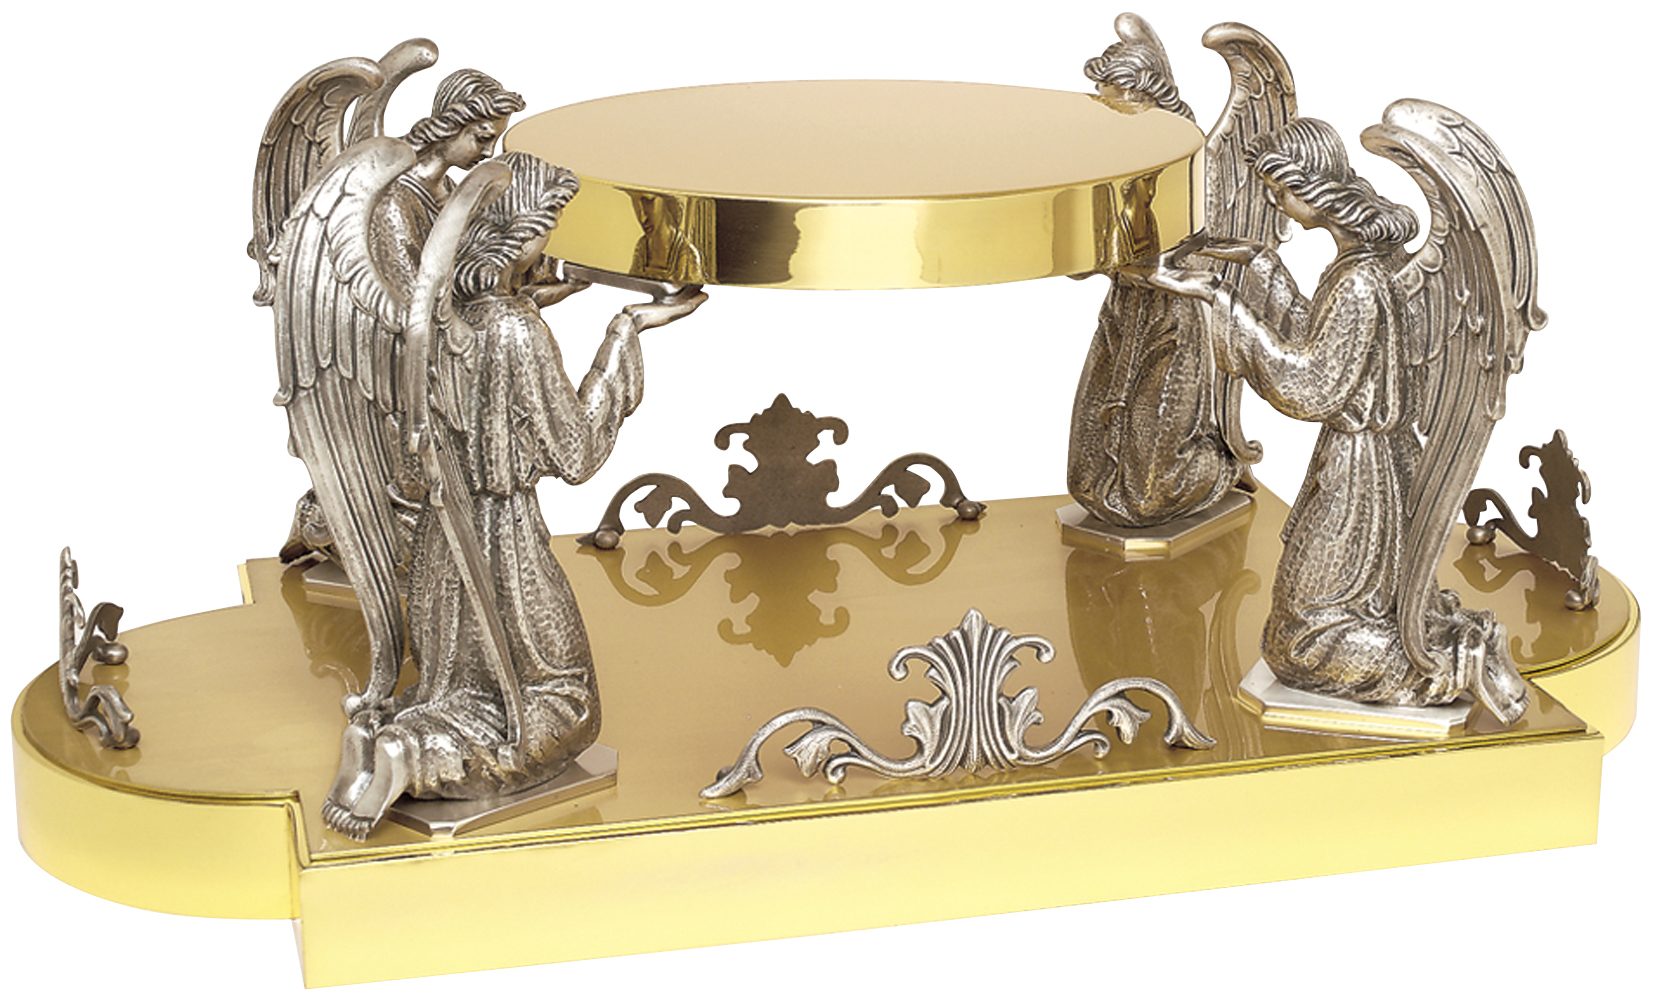 Thabor Table 24k Gold Plate Four Angels